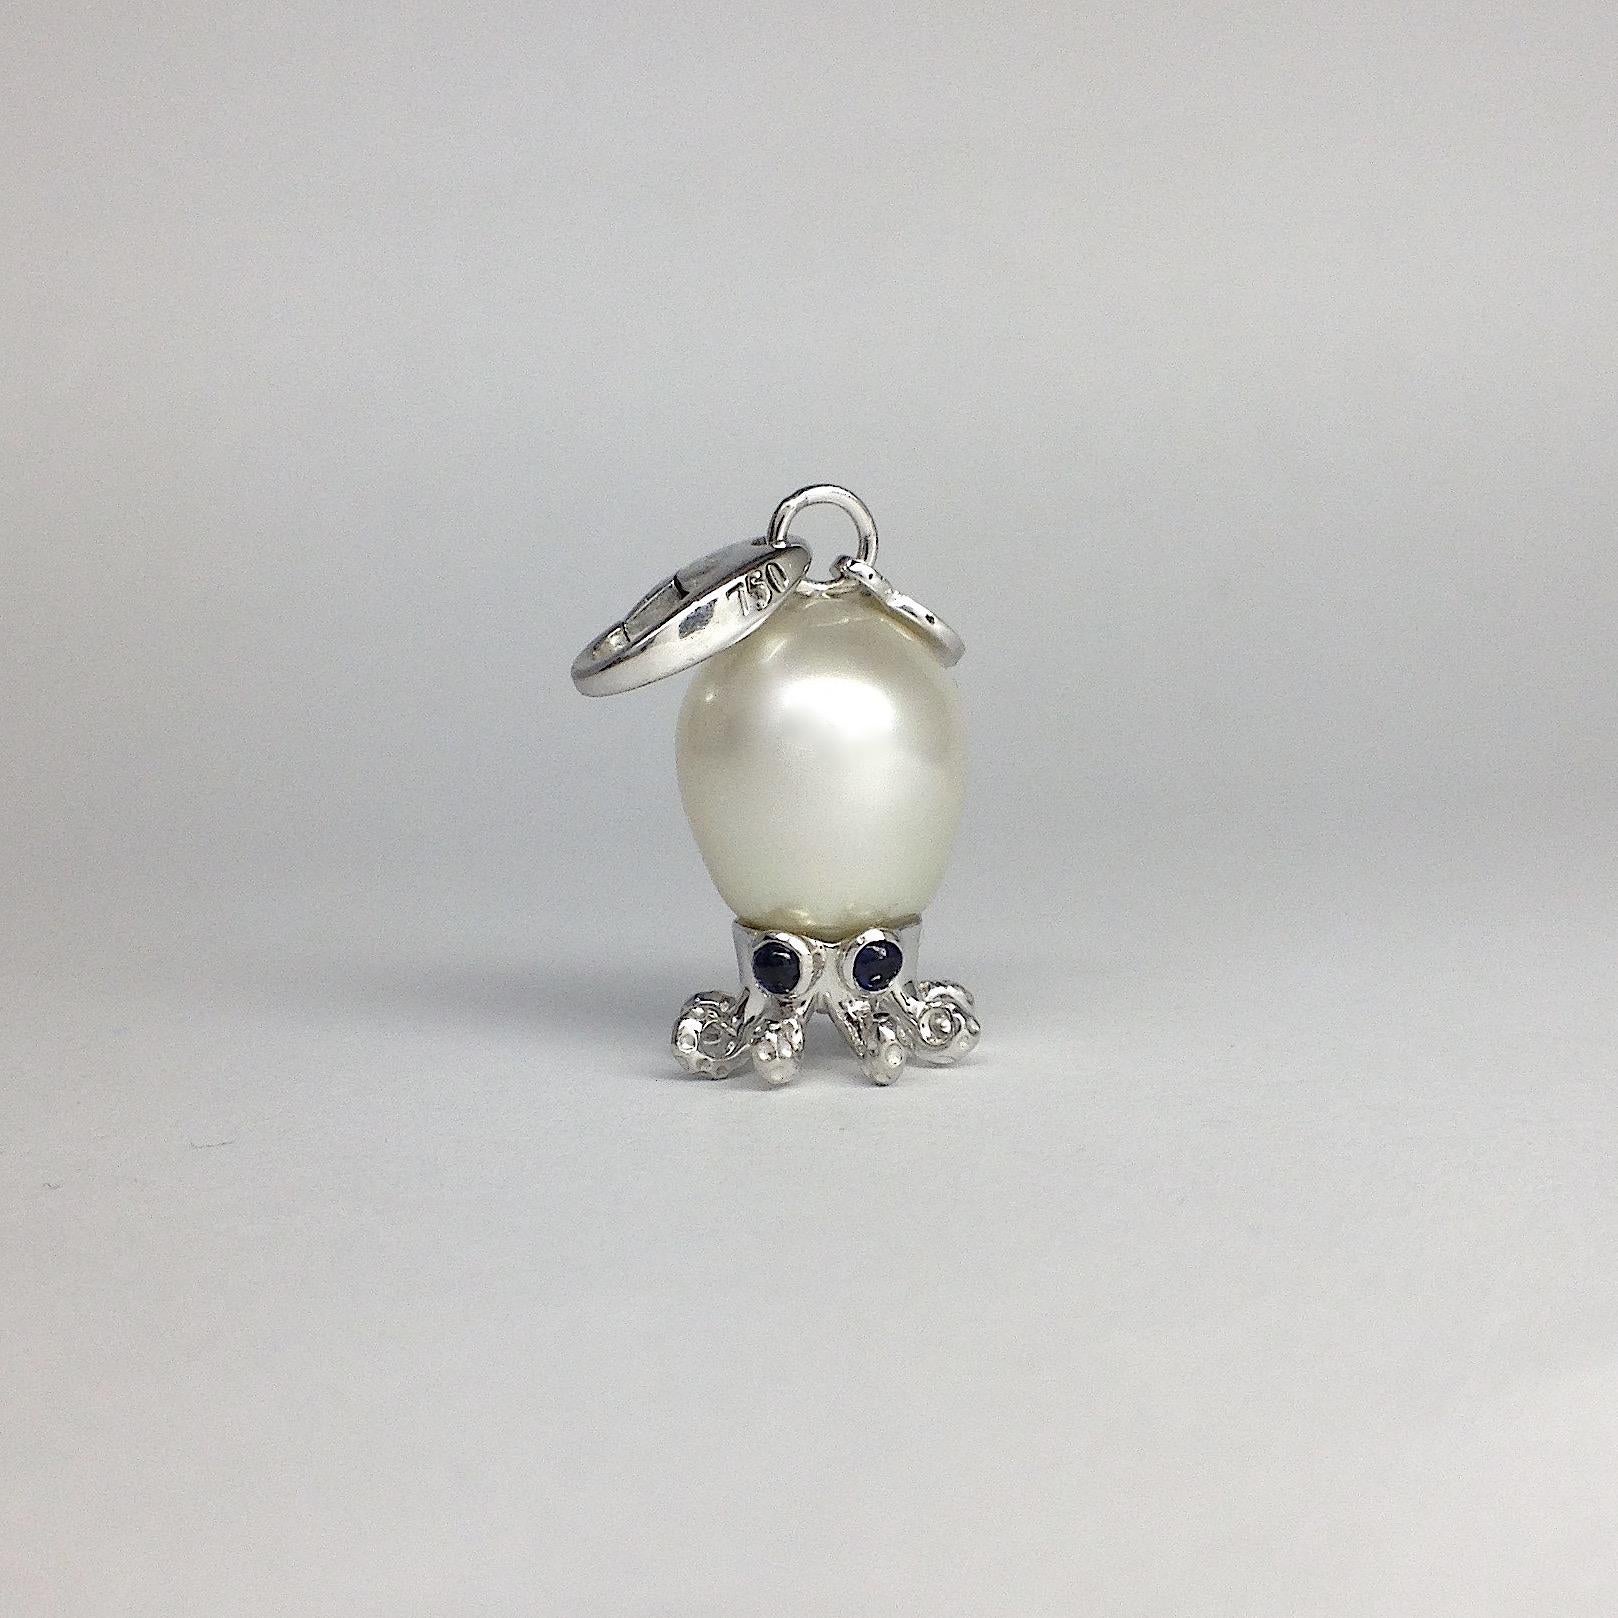 I used an oval Australian pearl and I made  the tentacles in white gold. Its eyes are two blue sapphires.
The ring for the necklace is a carabiner so it can also be worn as a beautiful charm on a bracelet.
The sapphires are in total ct 0.07.
The